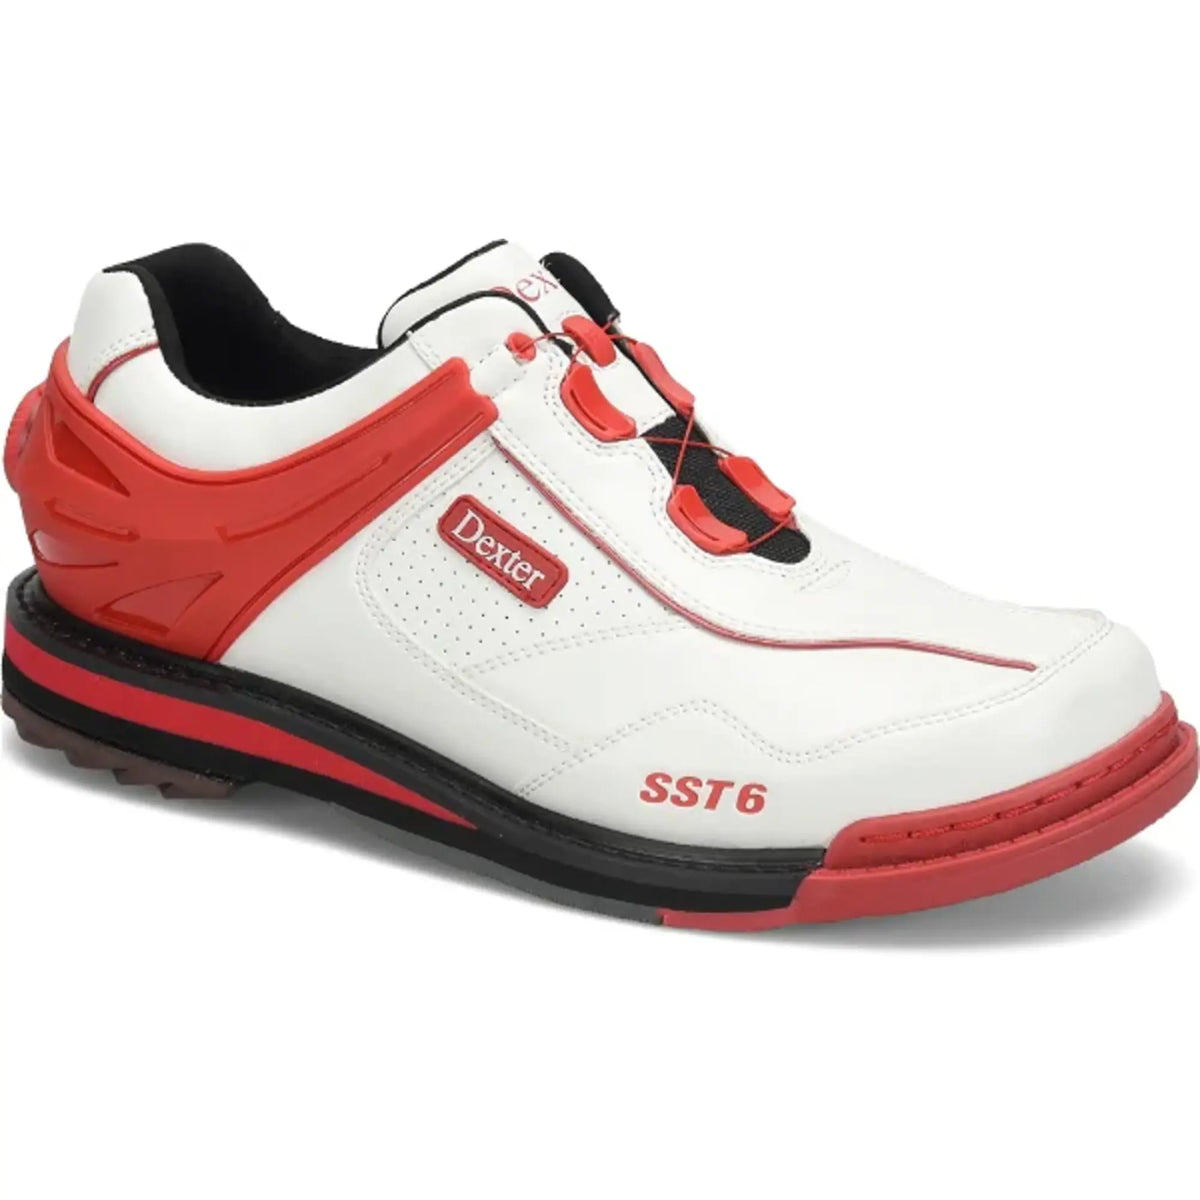 SST 6 Hybrid Boa White / Red Wide Shoes